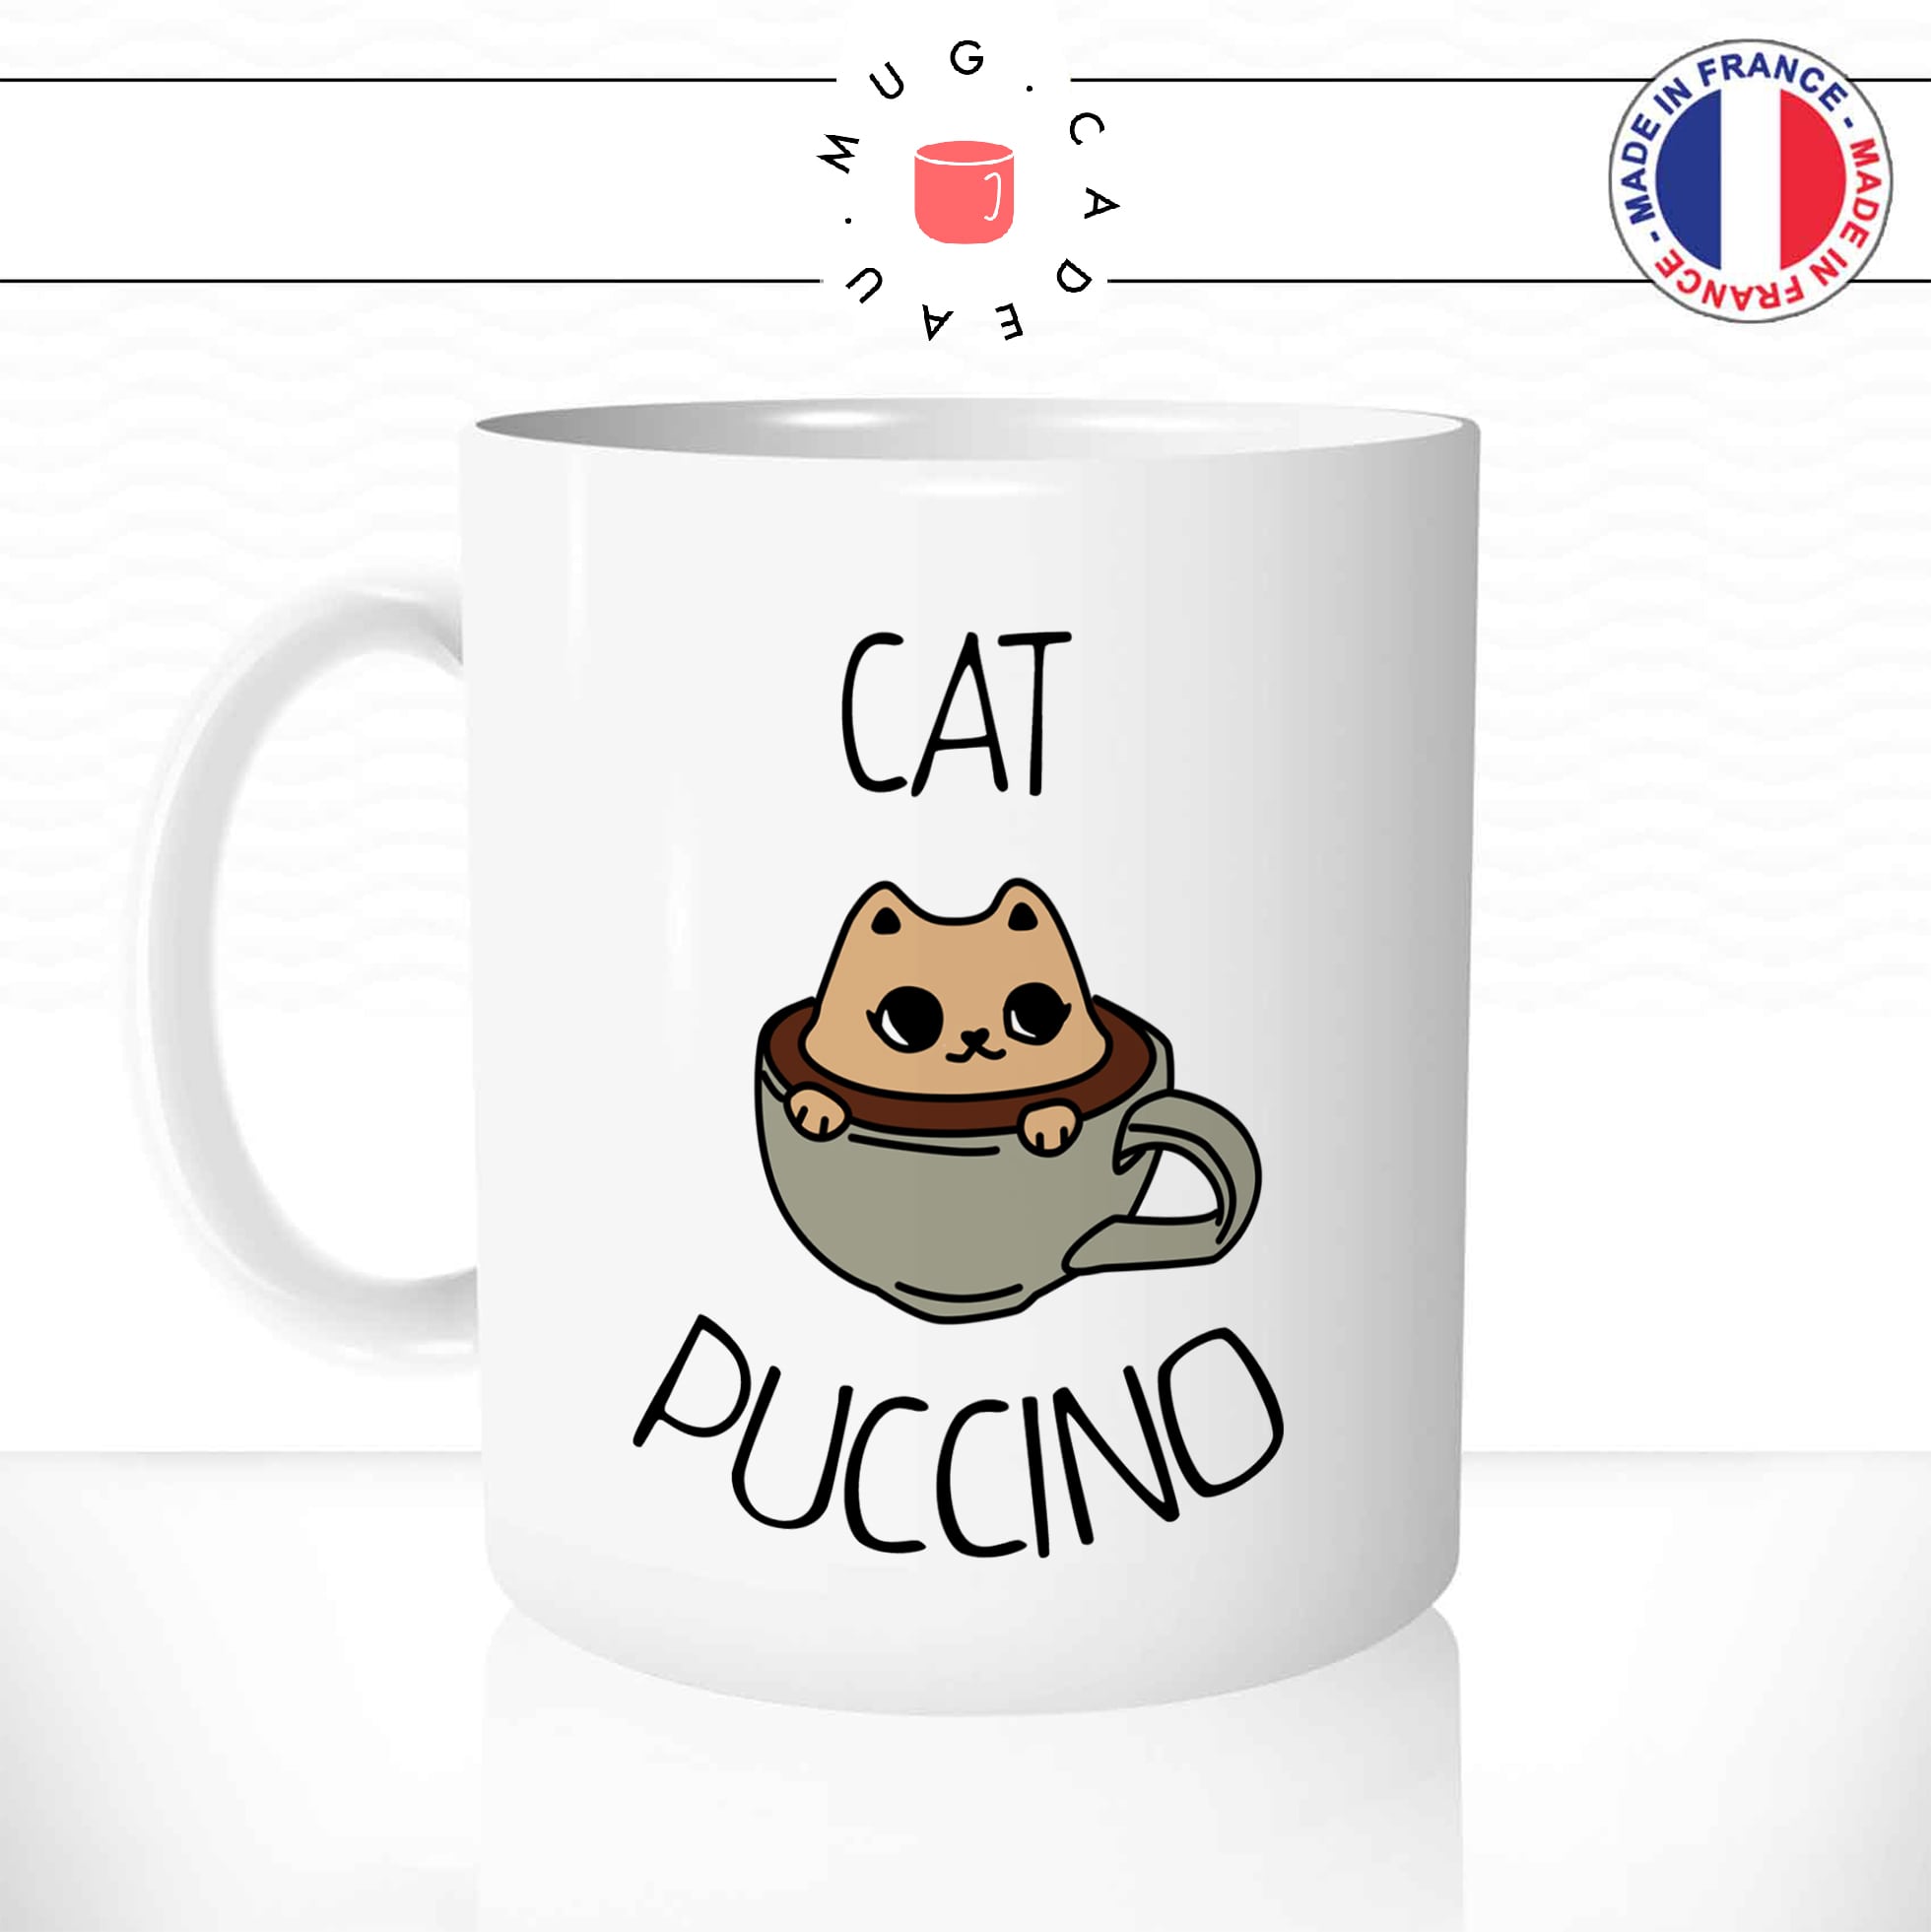 mug-tasse-cat-puccino-cappuccino-cafe-mousse-coffee-chat-chaton-idee-cadeau1